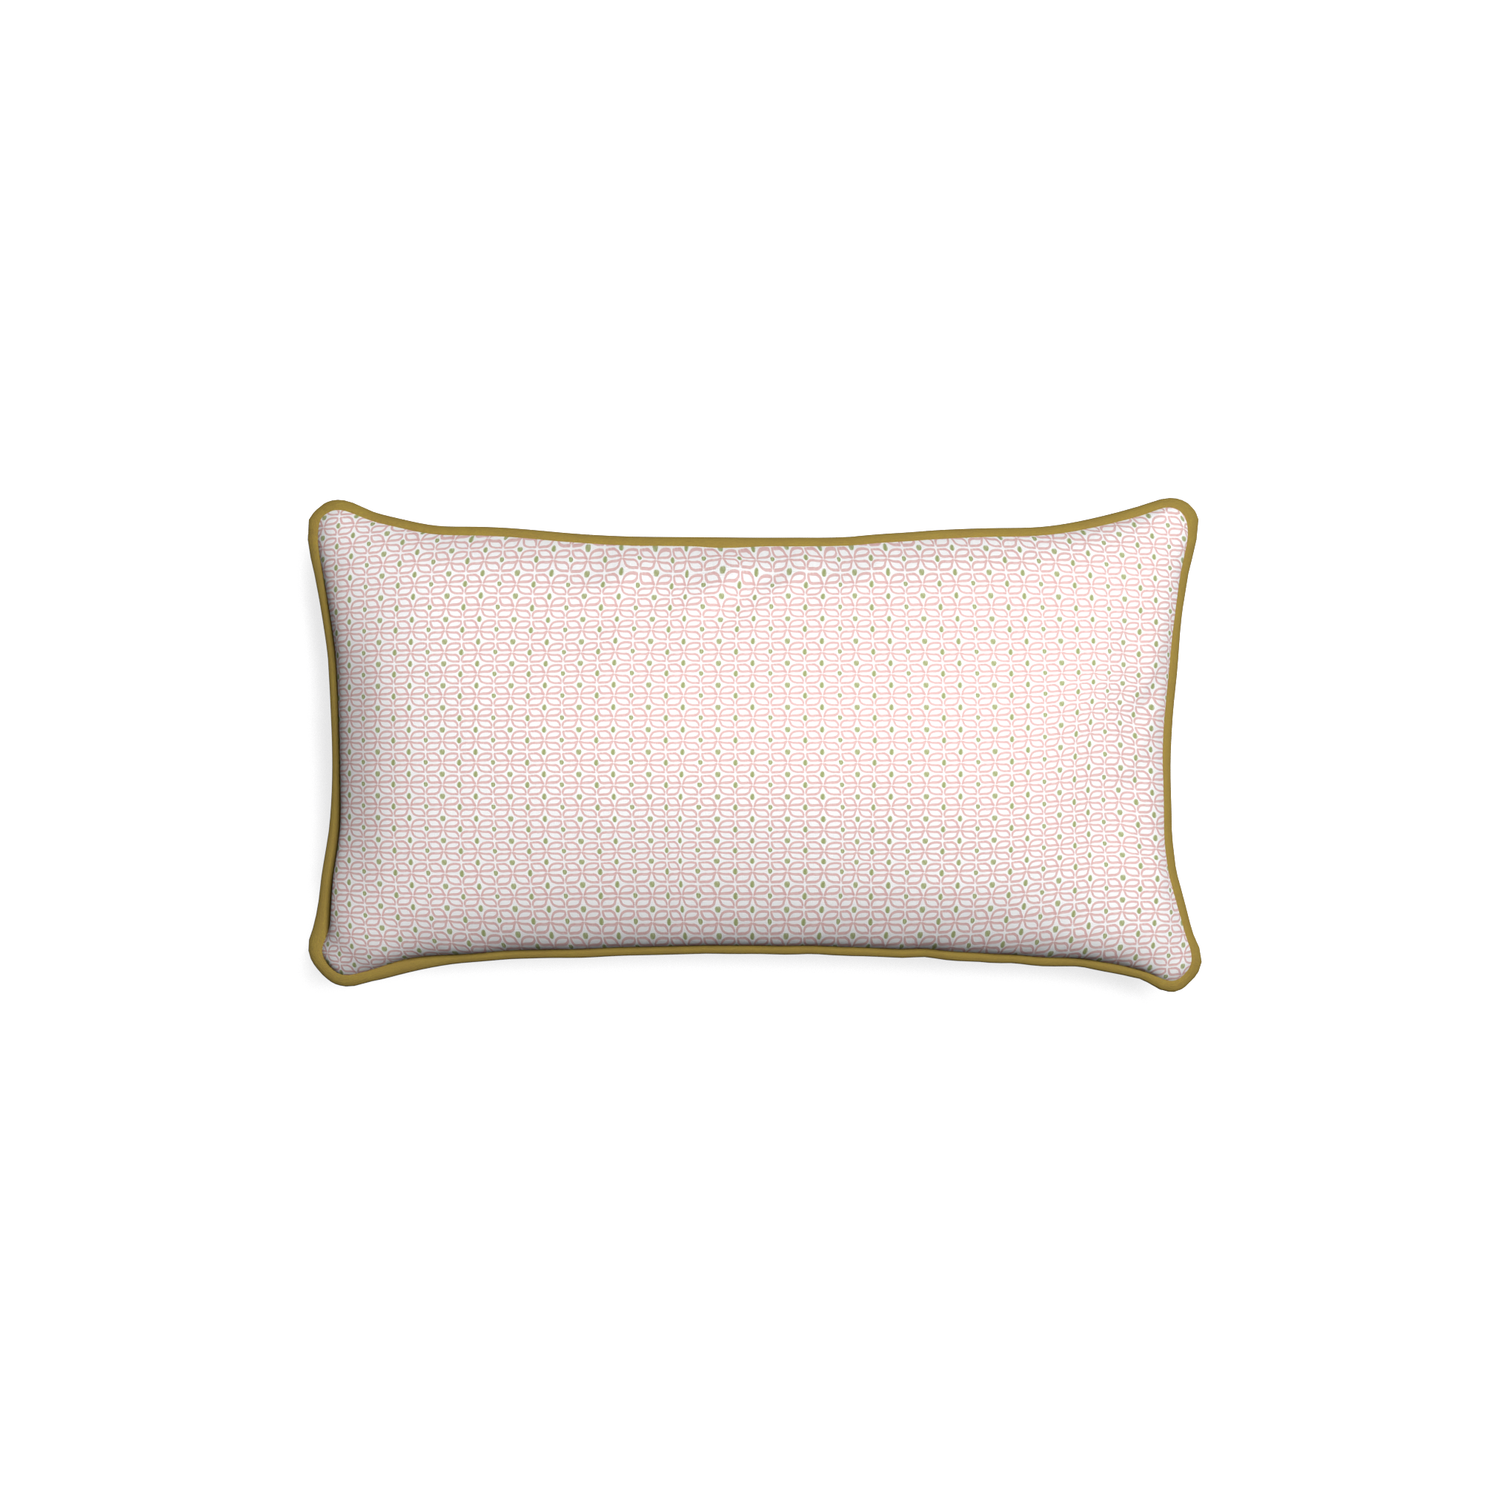 Petite-lumbar loomi pink custom pink geometricpillow with c piping on white background